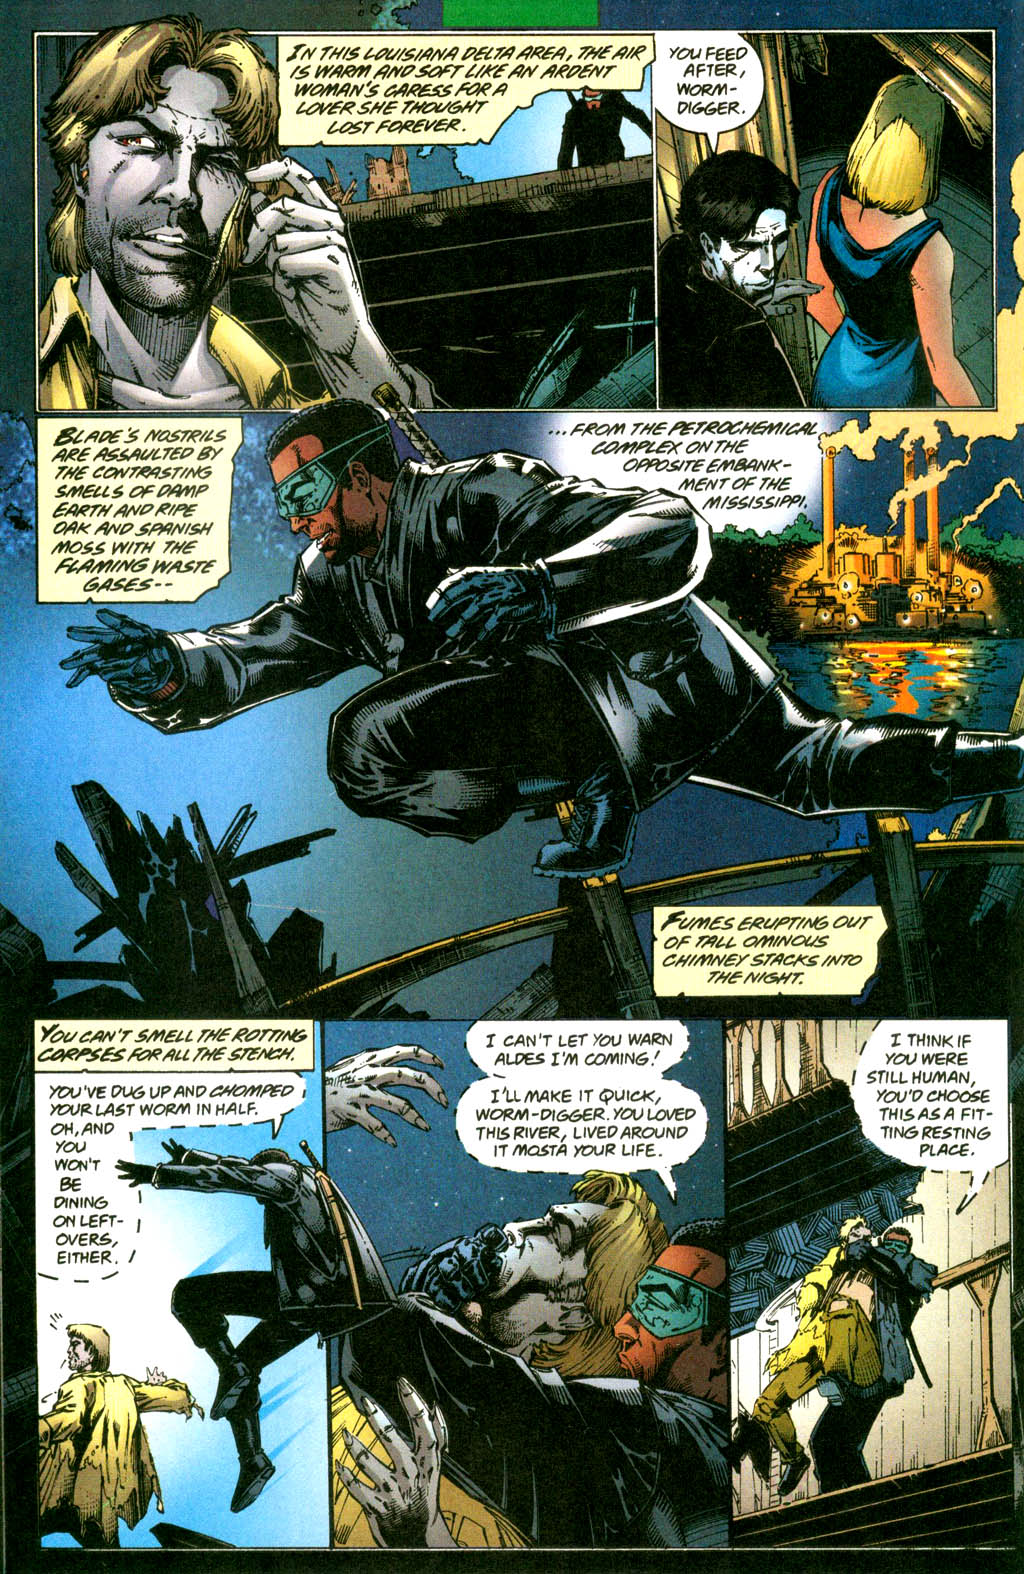 Blade (1998) 1 Page 8